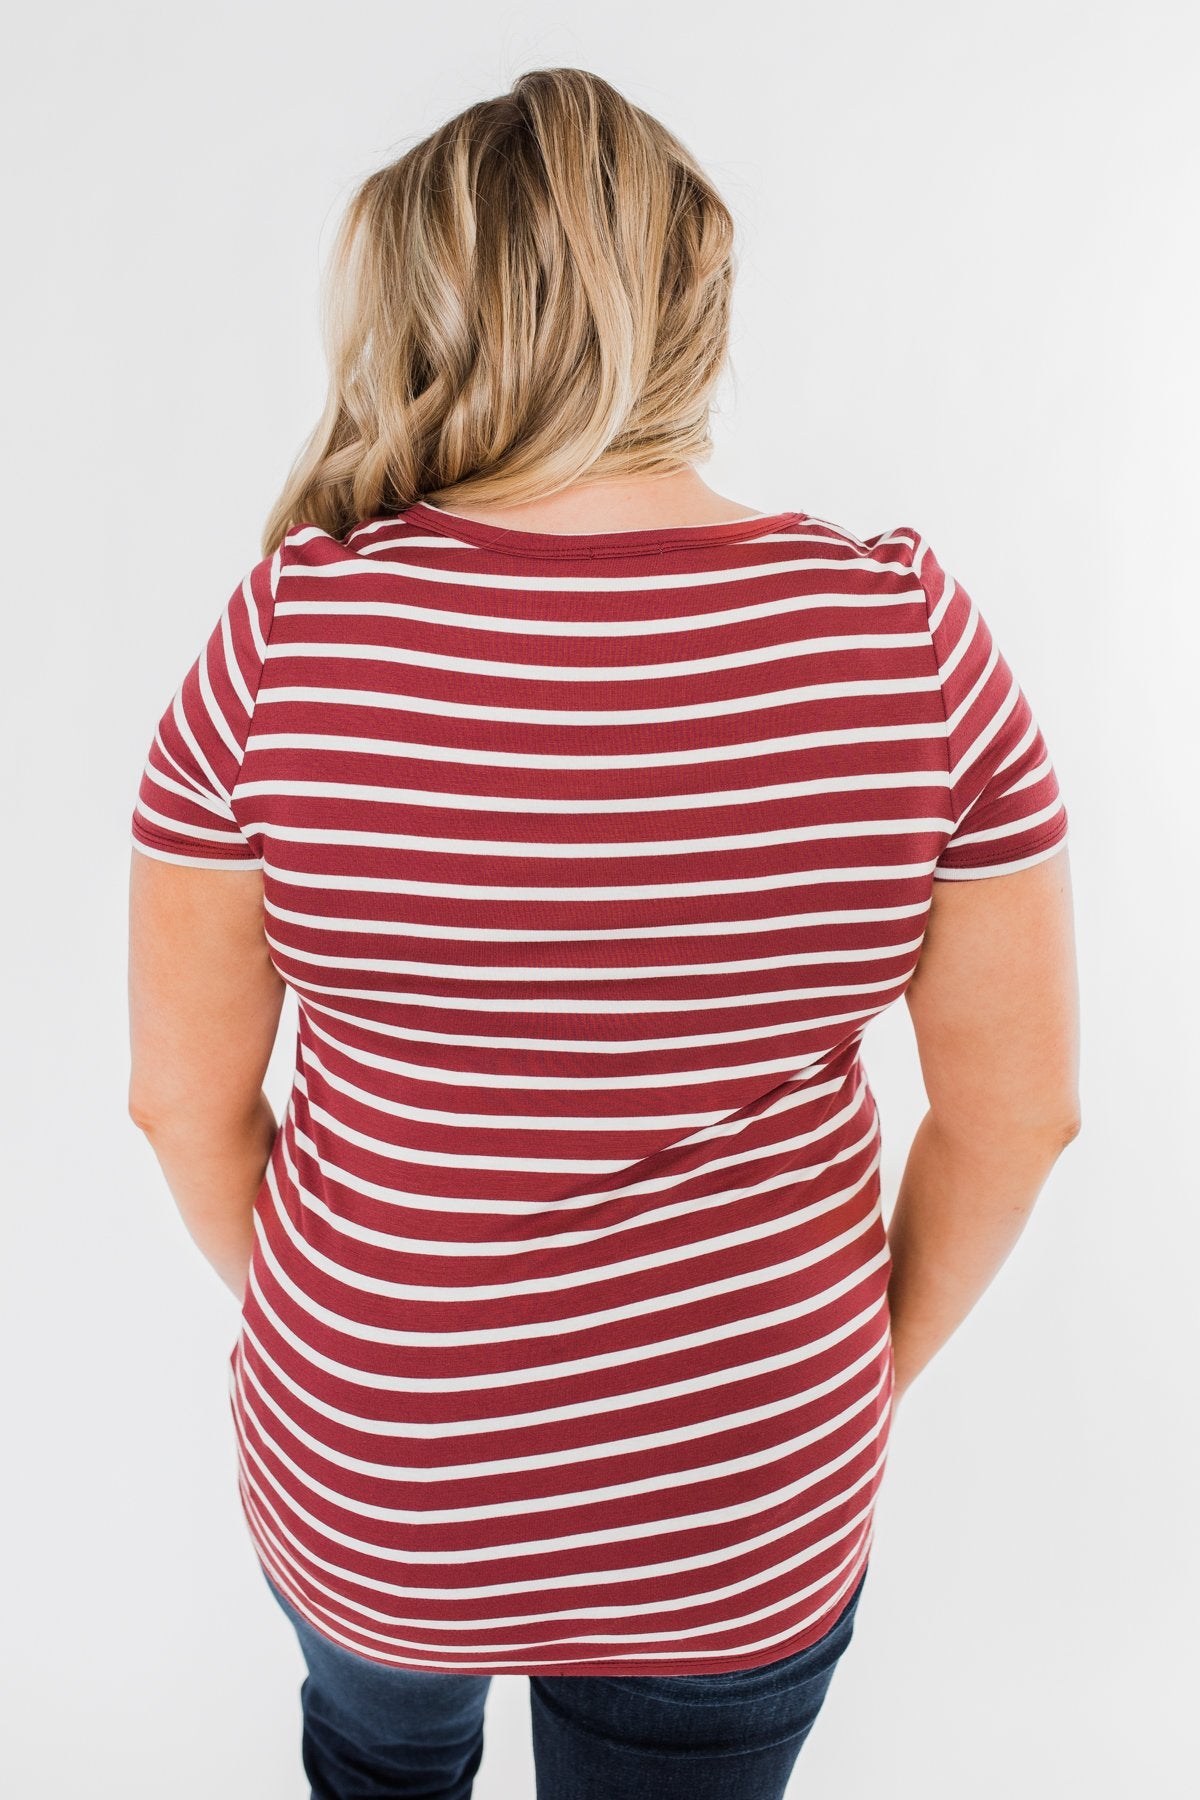 This is Me Striped Notch Pocket Top- Brick Red & Ivory